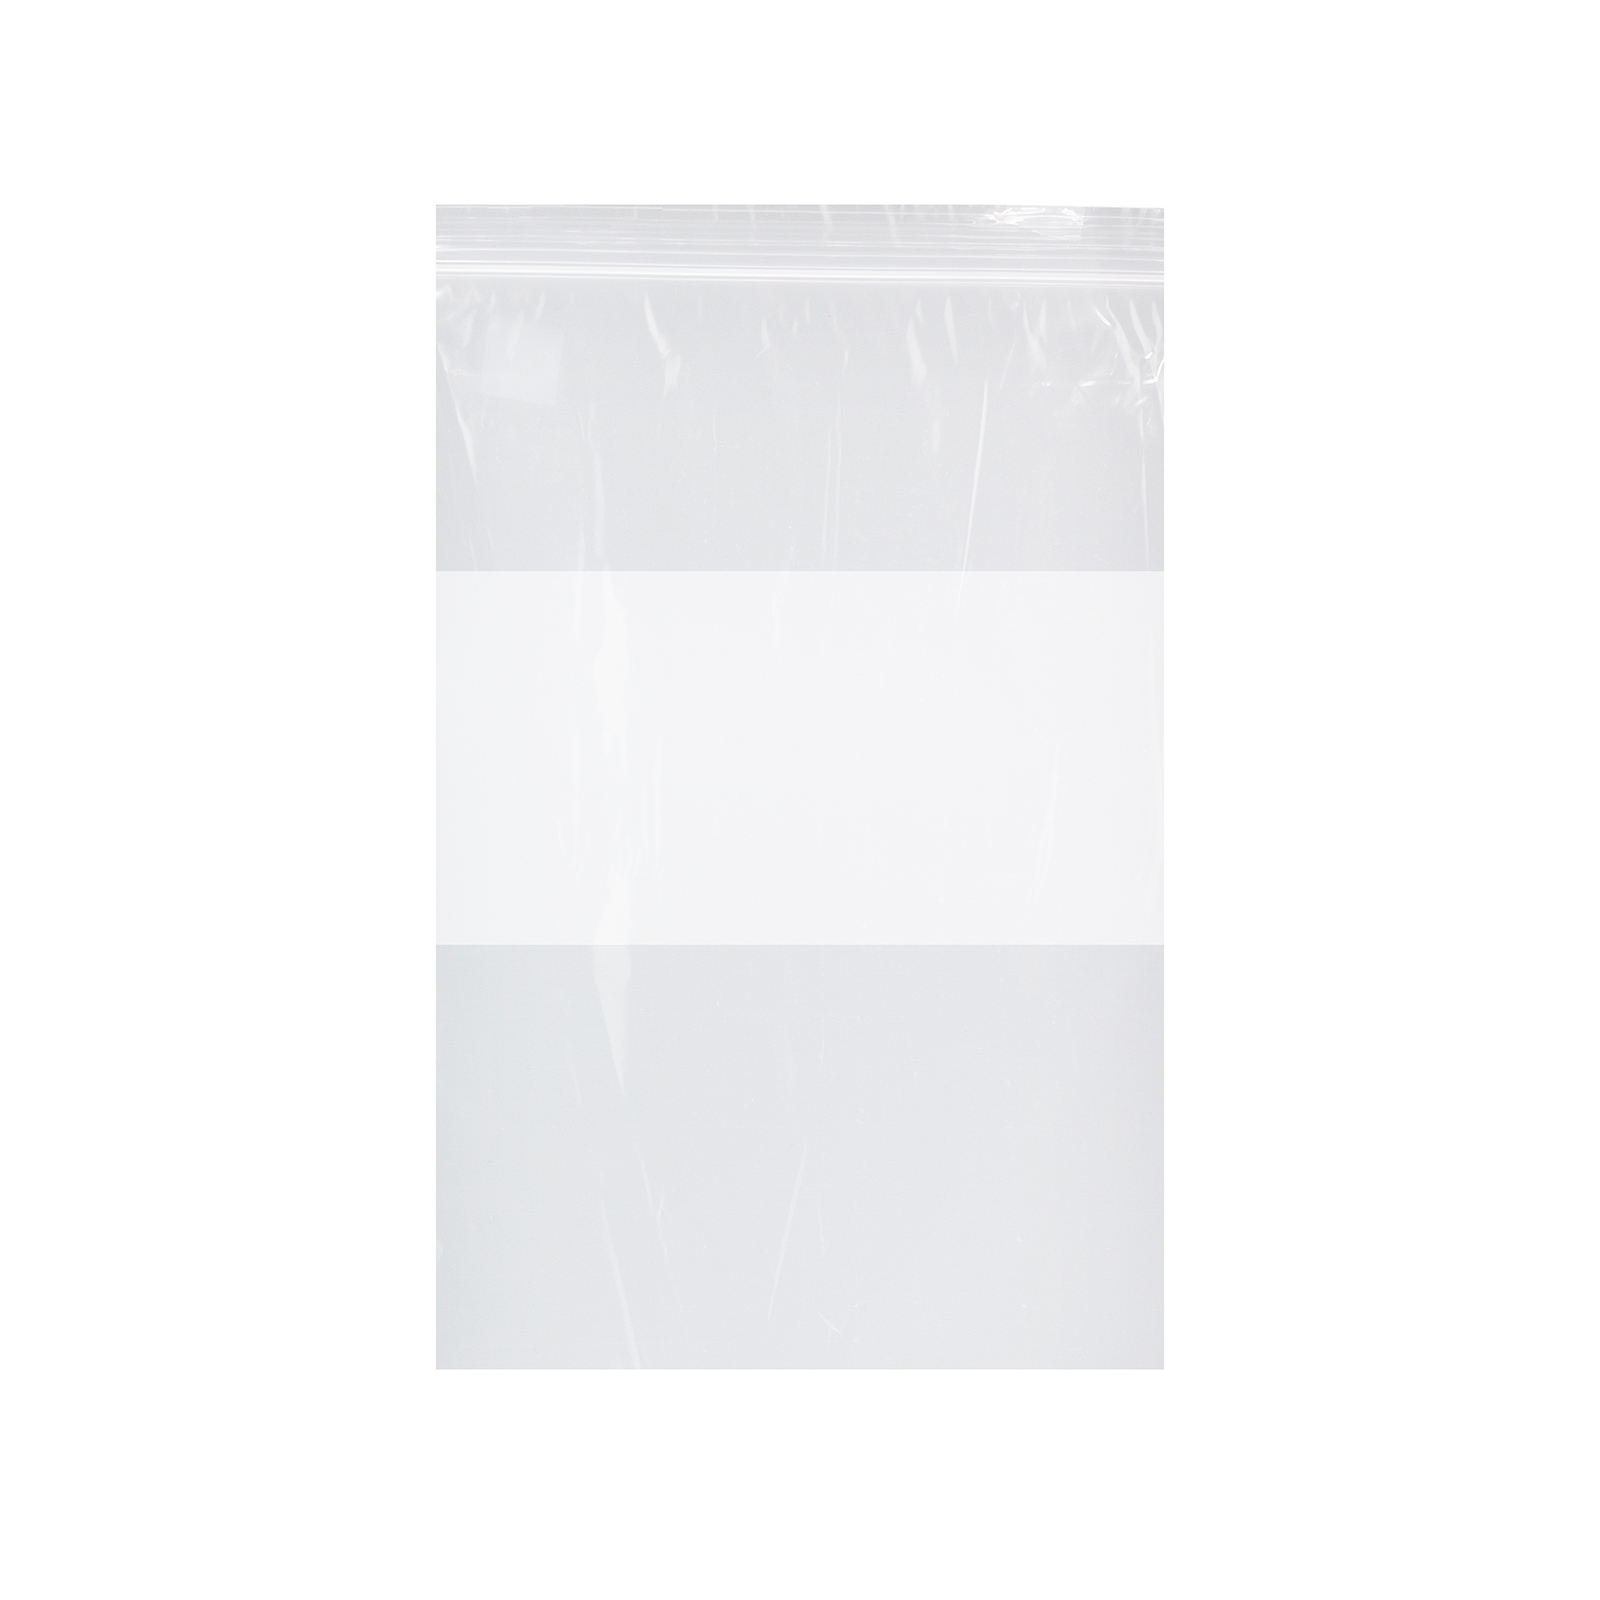 Zip Lock Bags Products, Supplies and Equipment